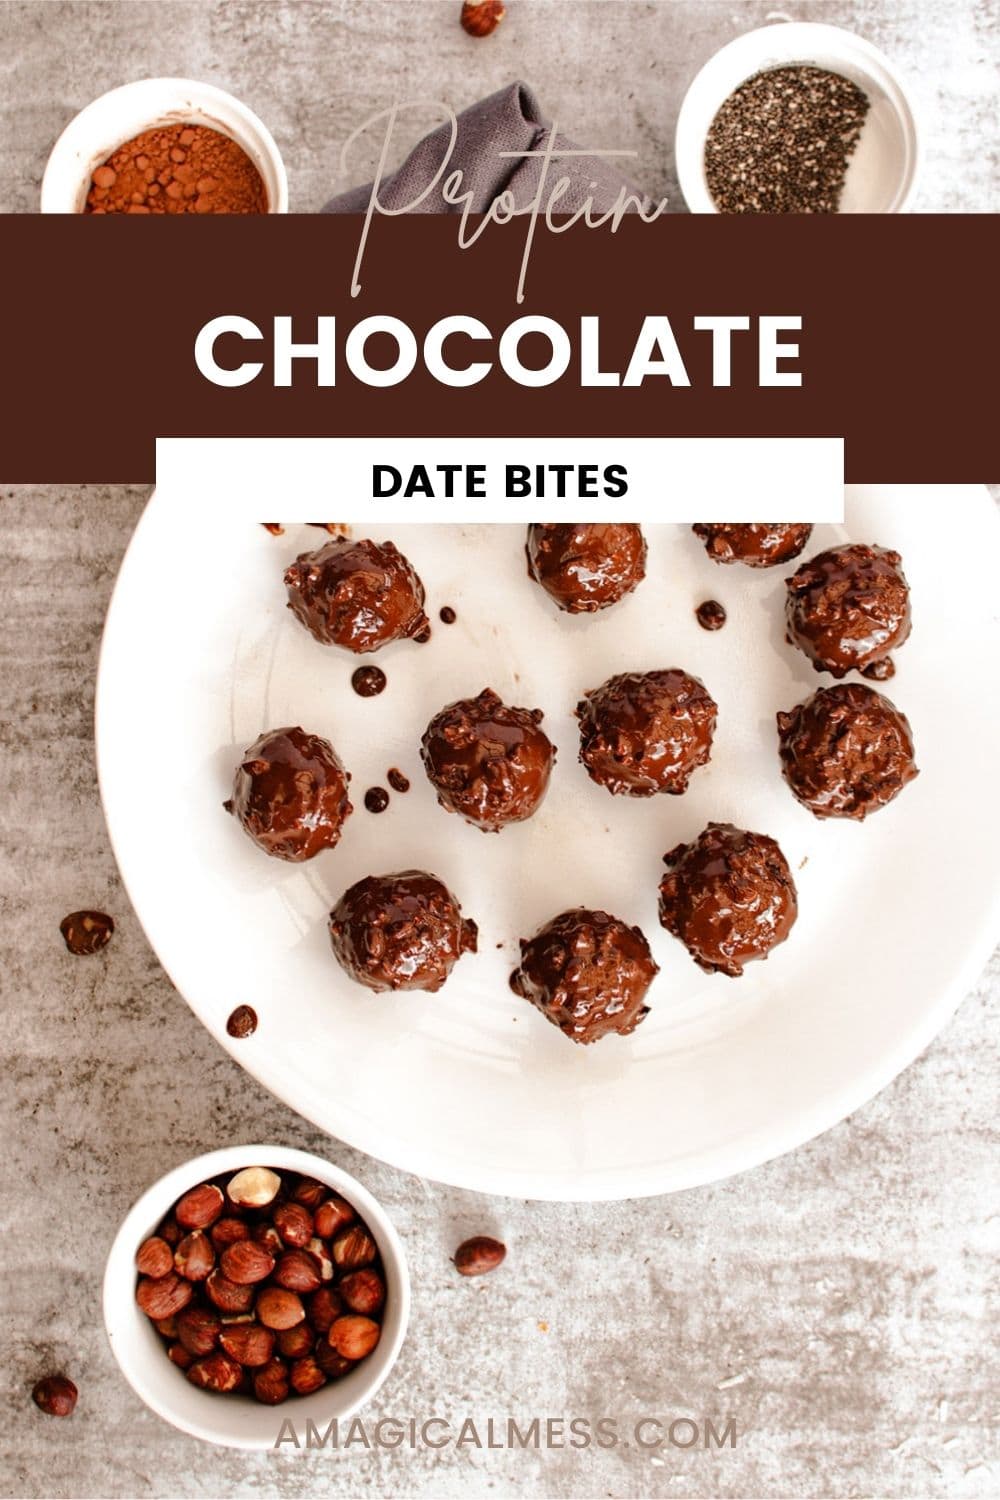 coconut balls with dates on a plate with ingredients in bowls